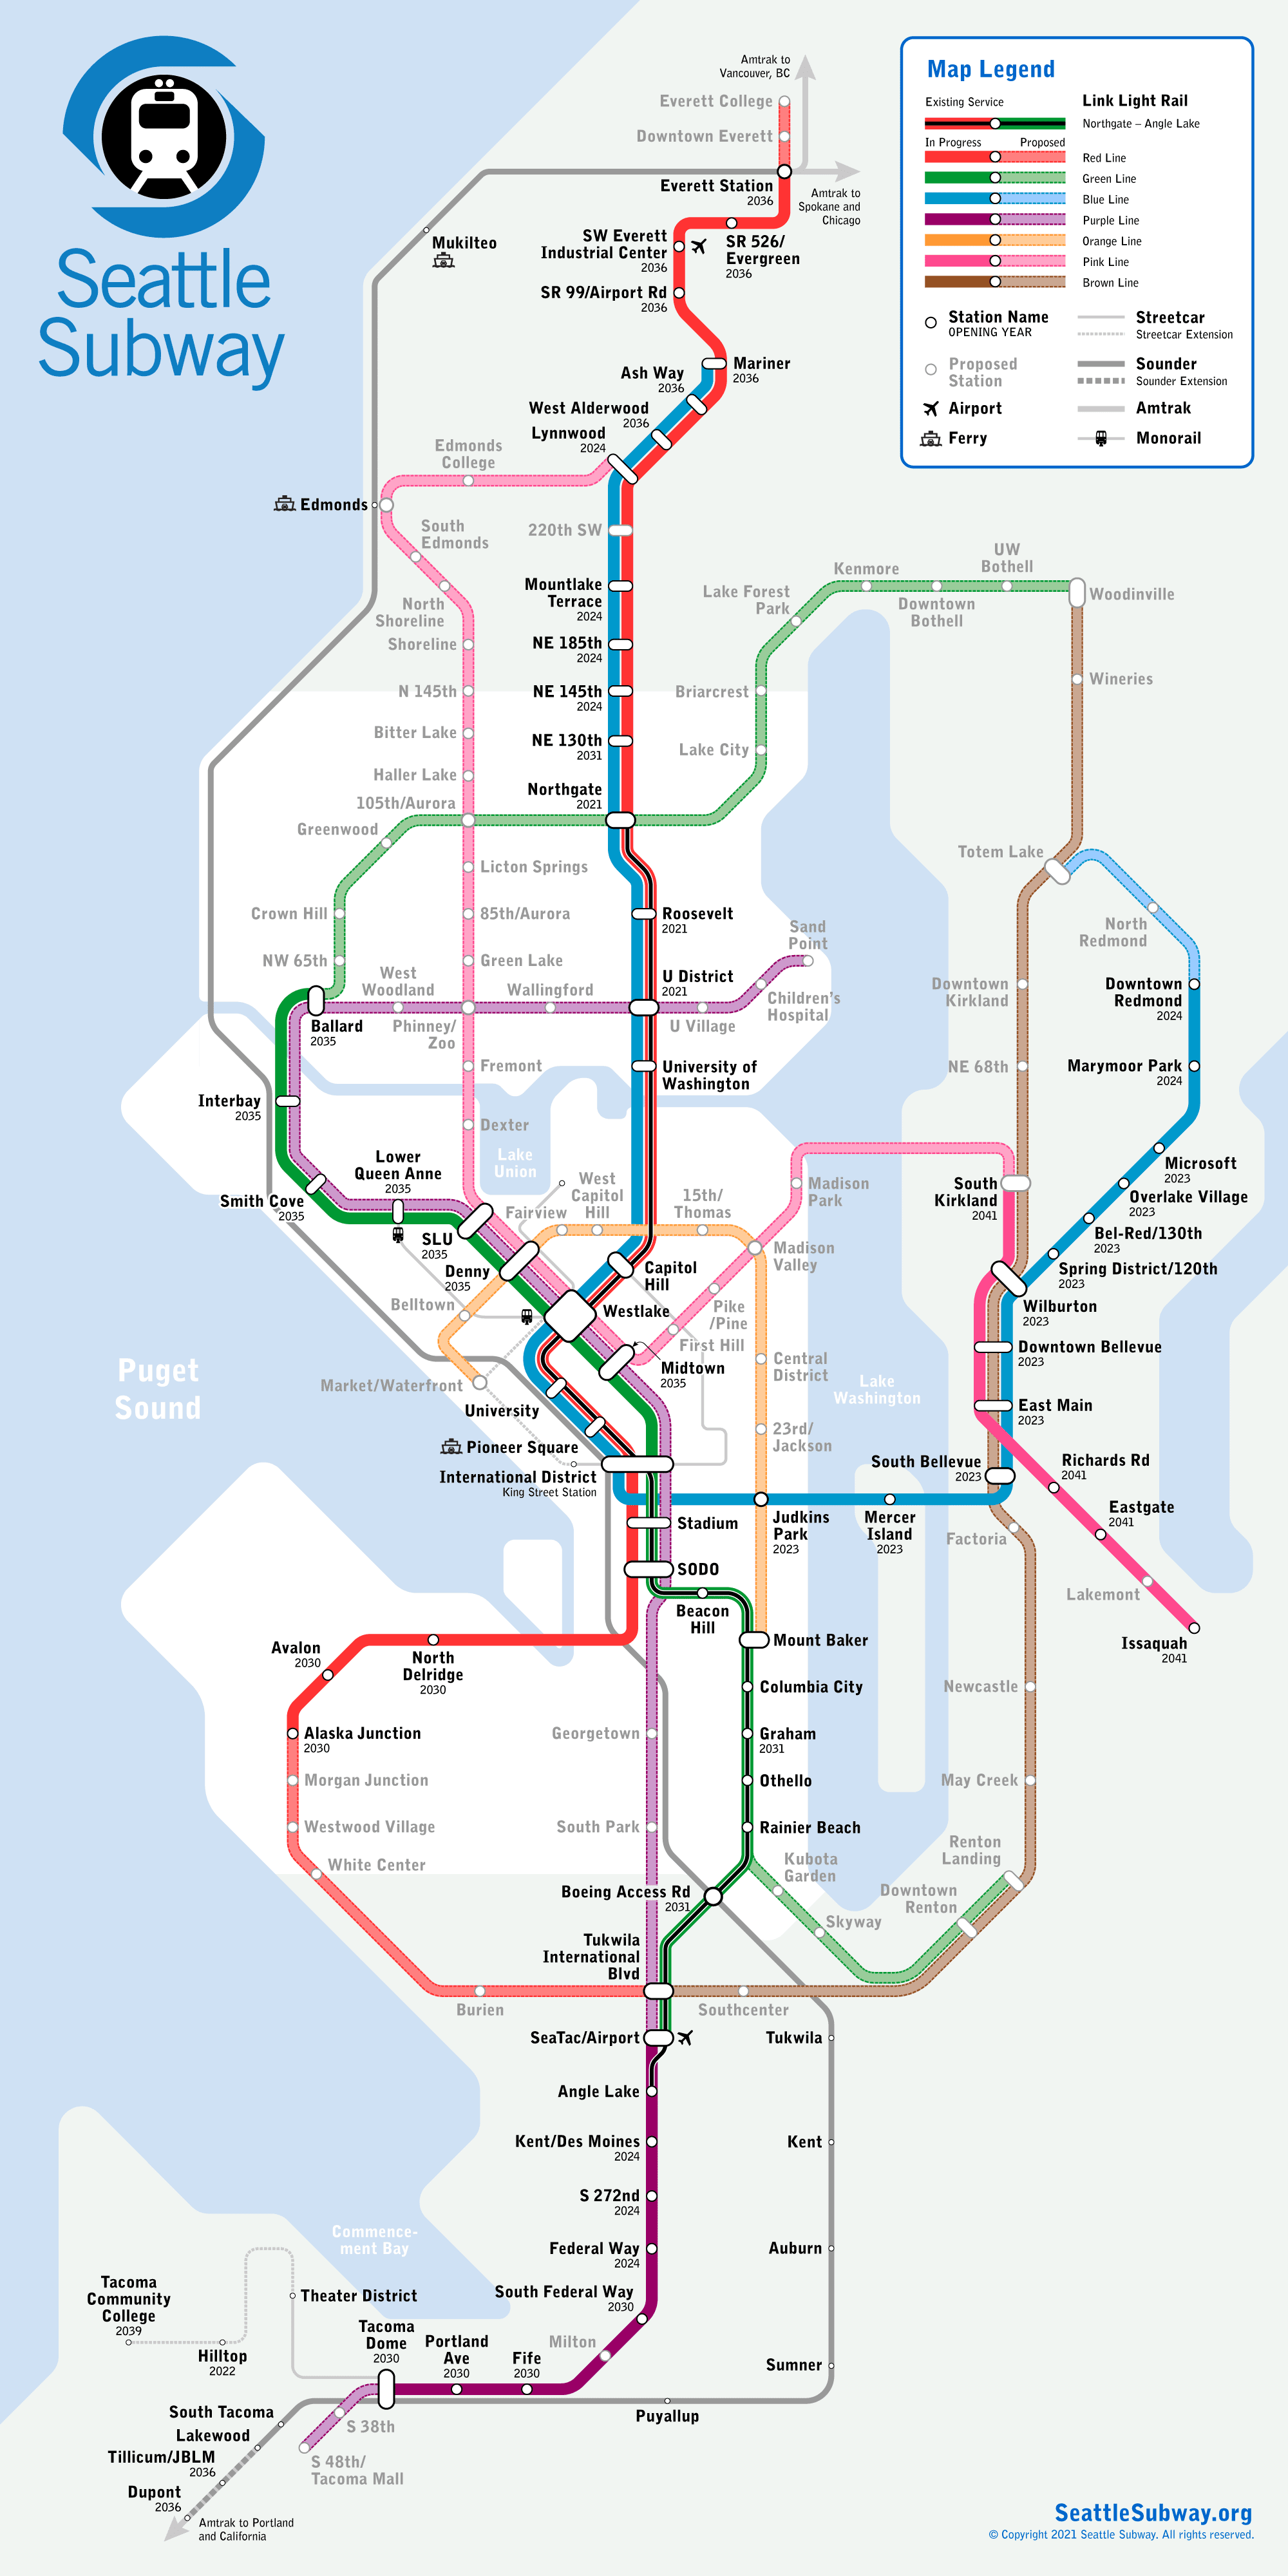 Seattle Subway’s 2021 Map Upgrades Light Rail Connections in Renton